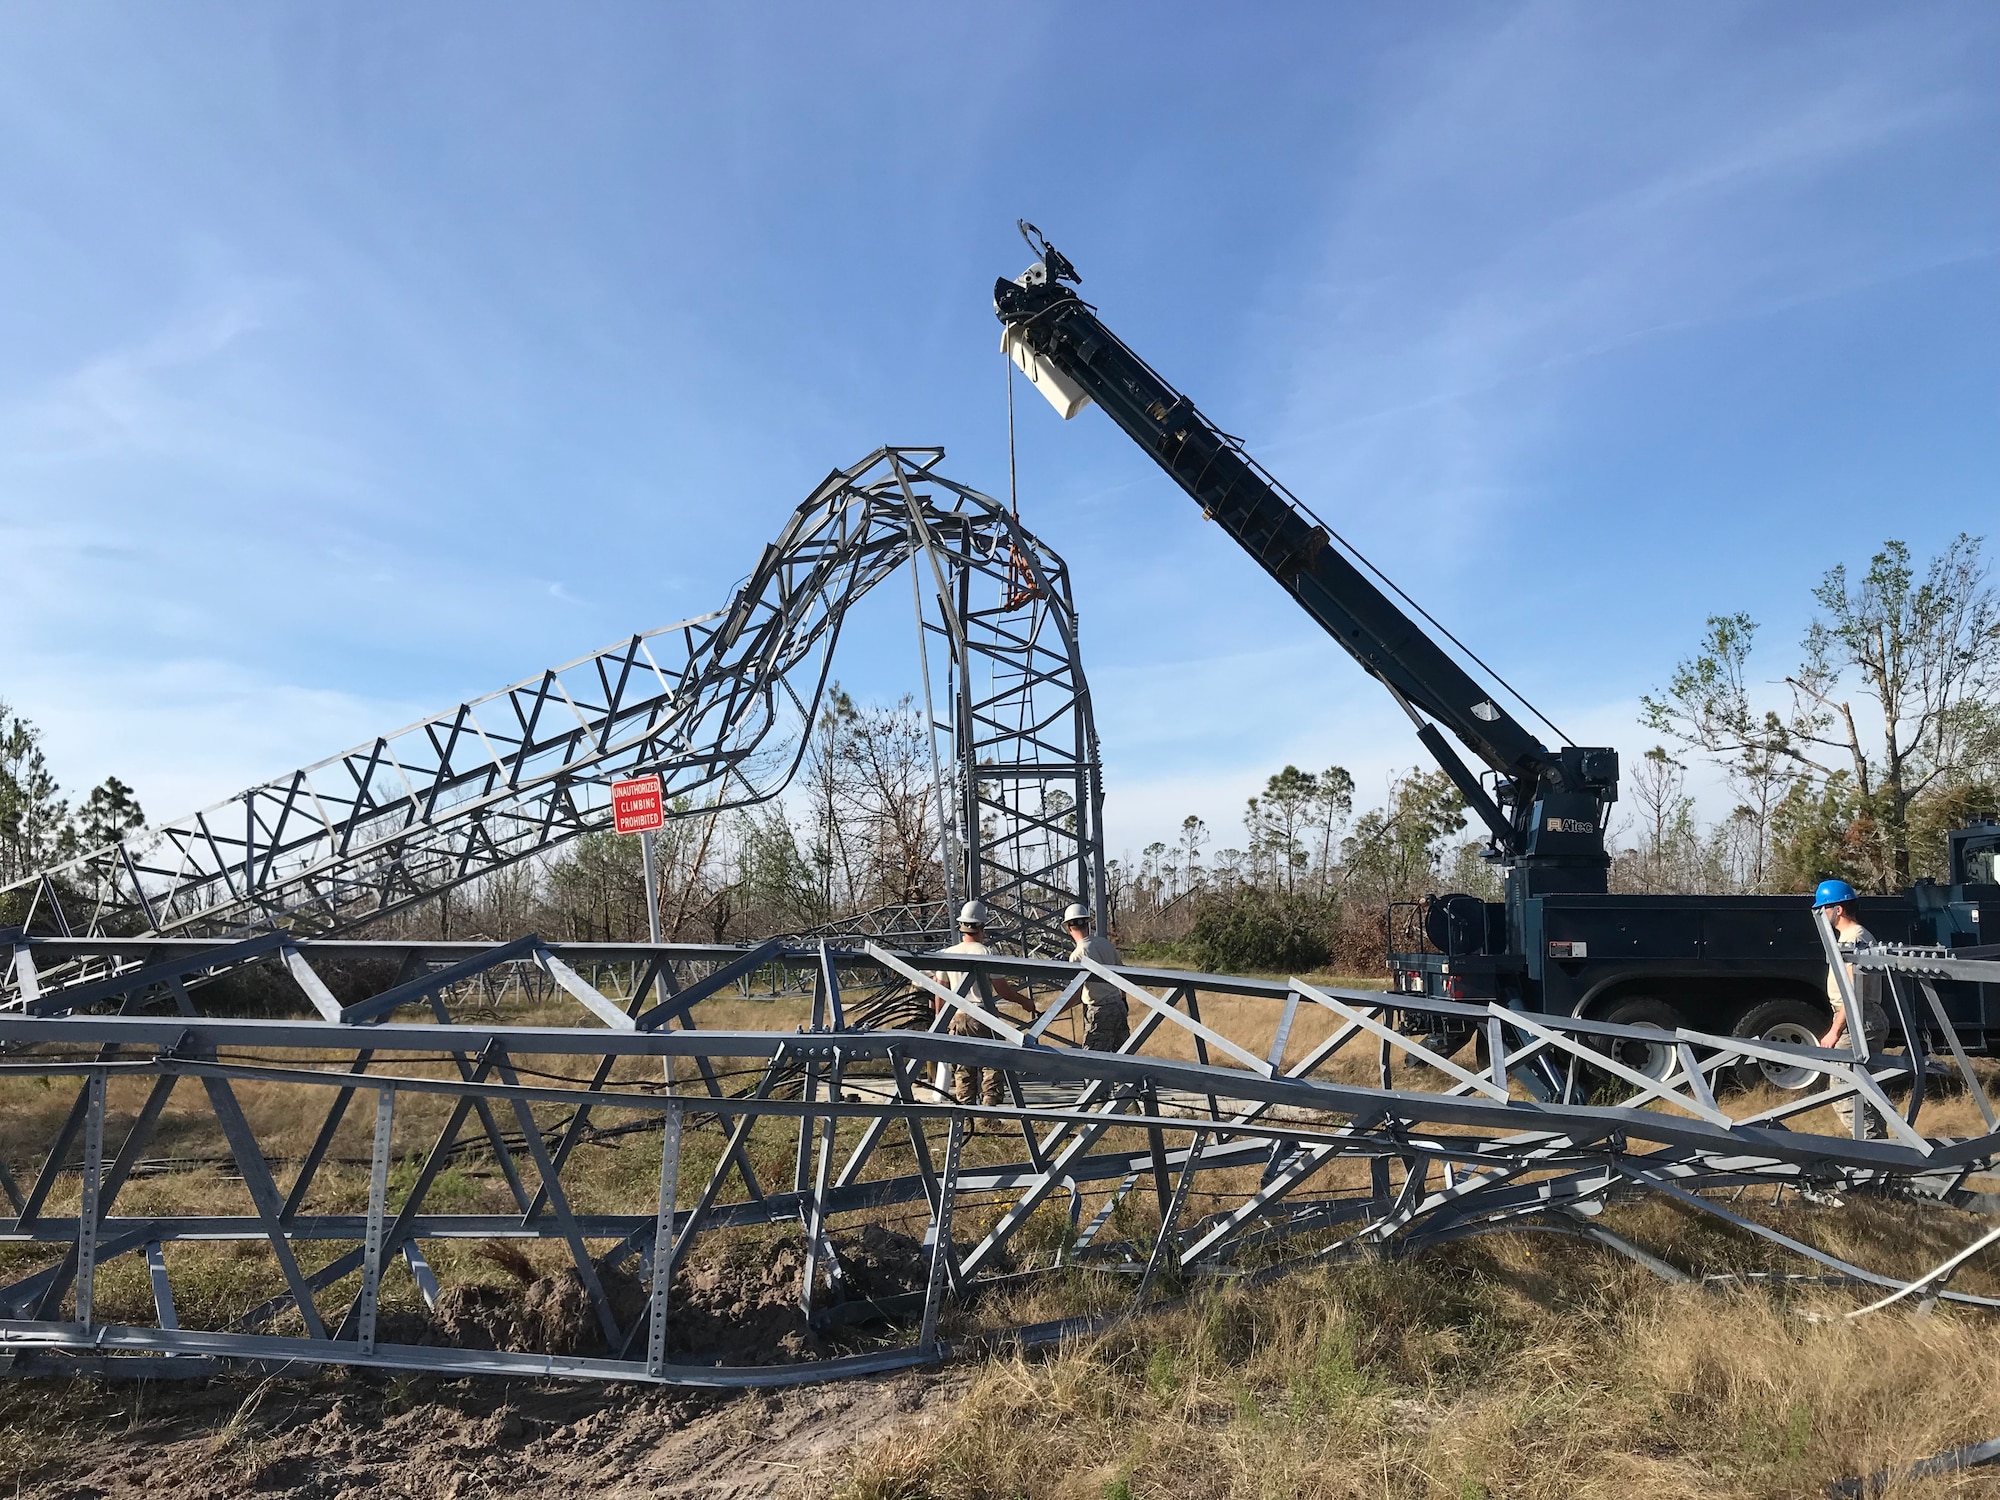 Members from the 210th Engineering Installation Squadron use a telephone main hydraulic derrick truck to remove a damaged tower at Tyndall Air Force Base, Nov. 17, 2018.